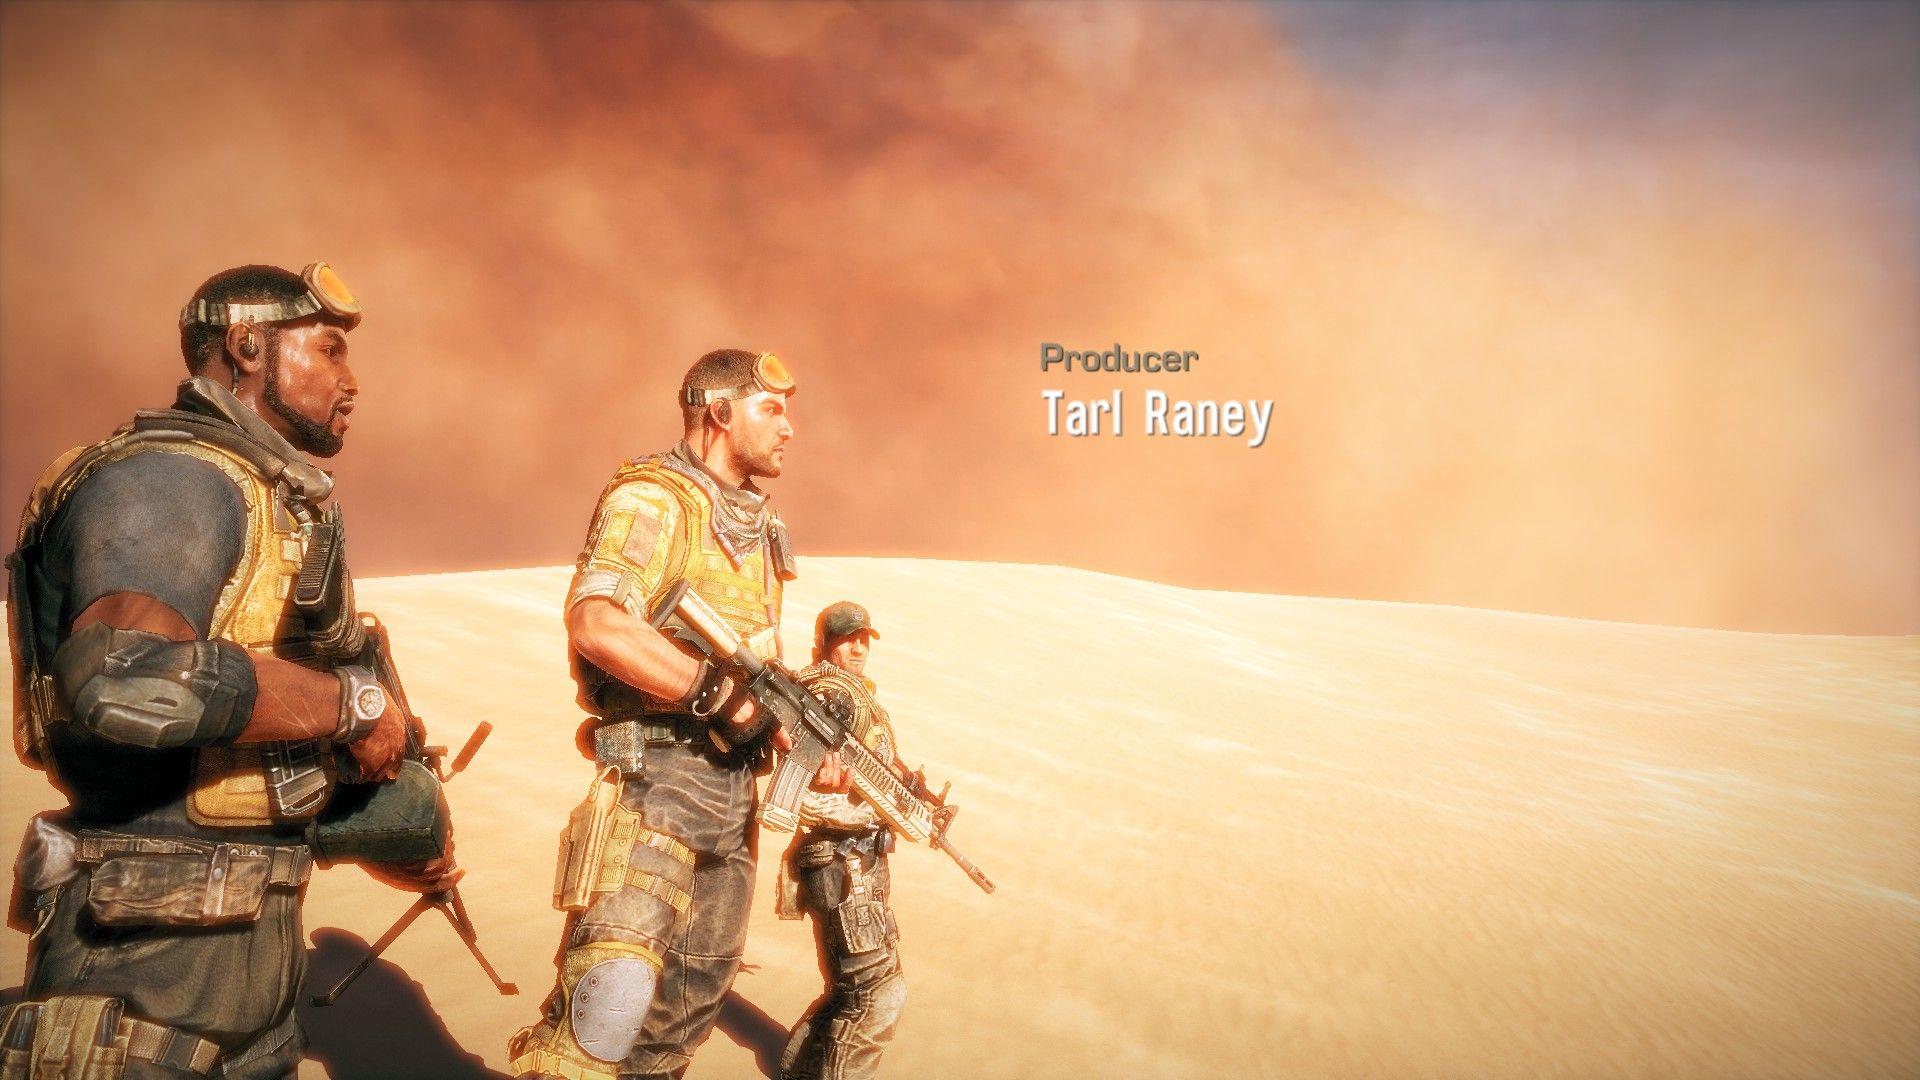 spec ops the line pc game trainer download